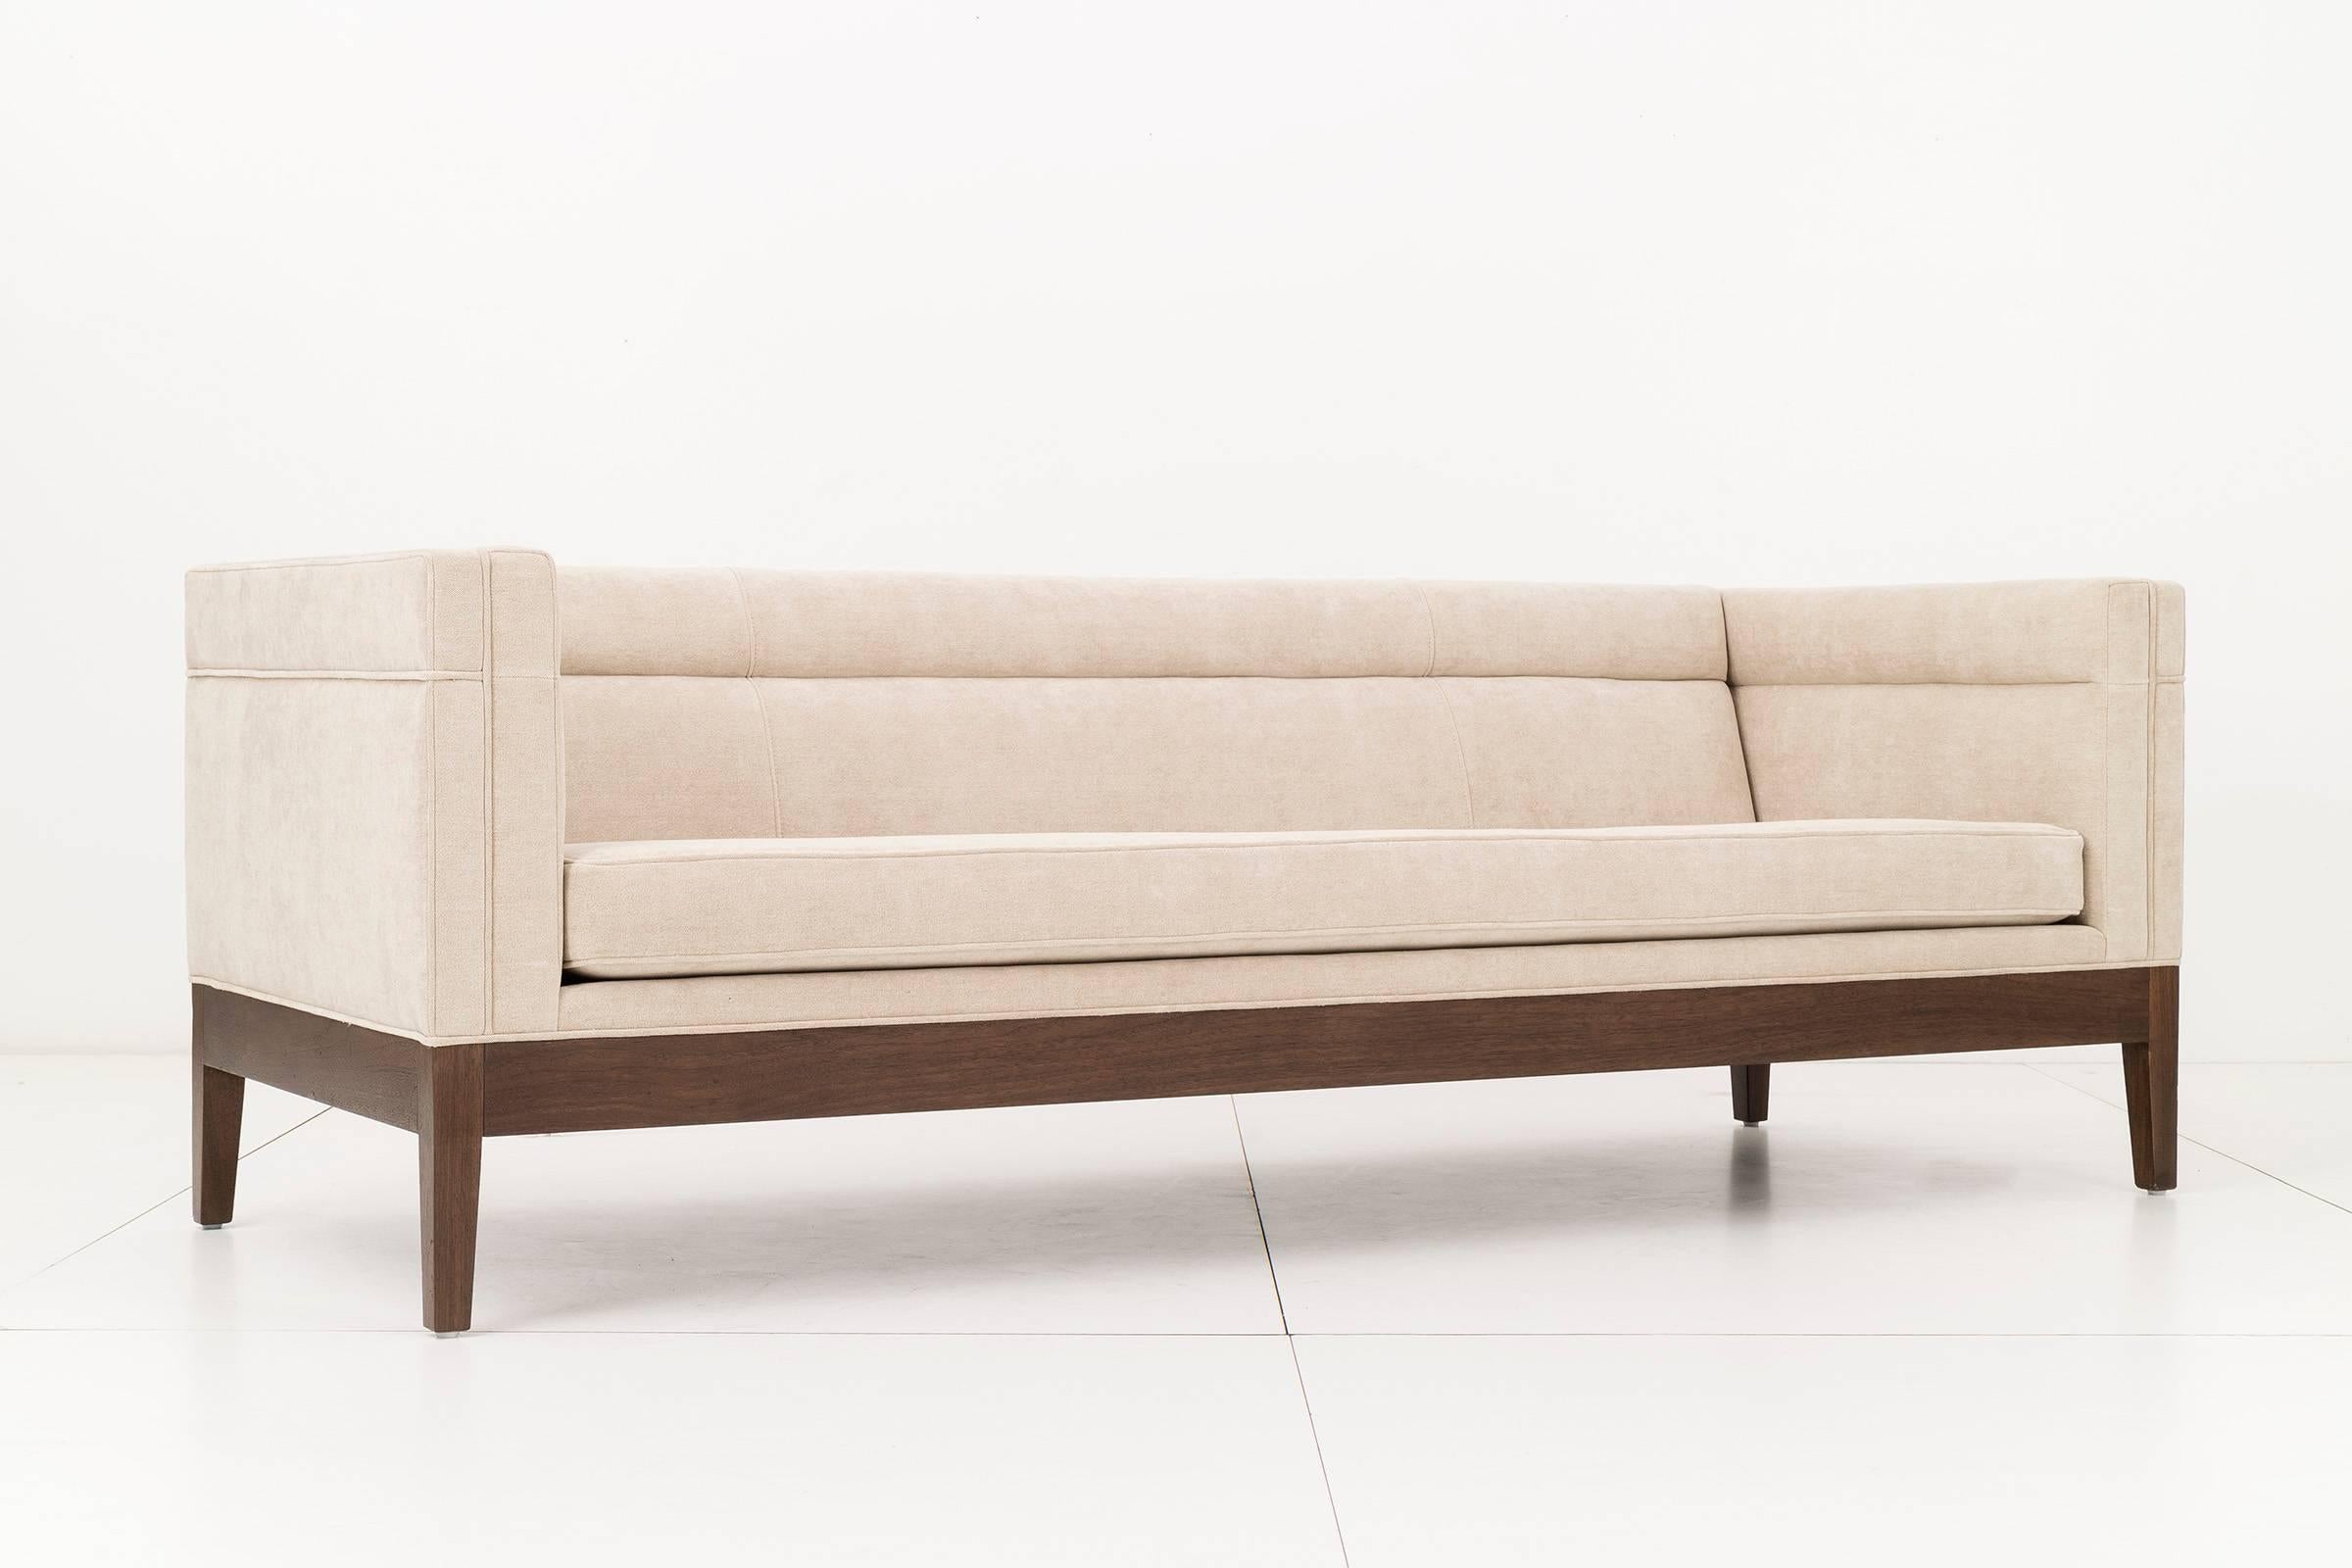 Holly hunt sofa with channeled back, reupholstered with mohair and walnut legs.
       